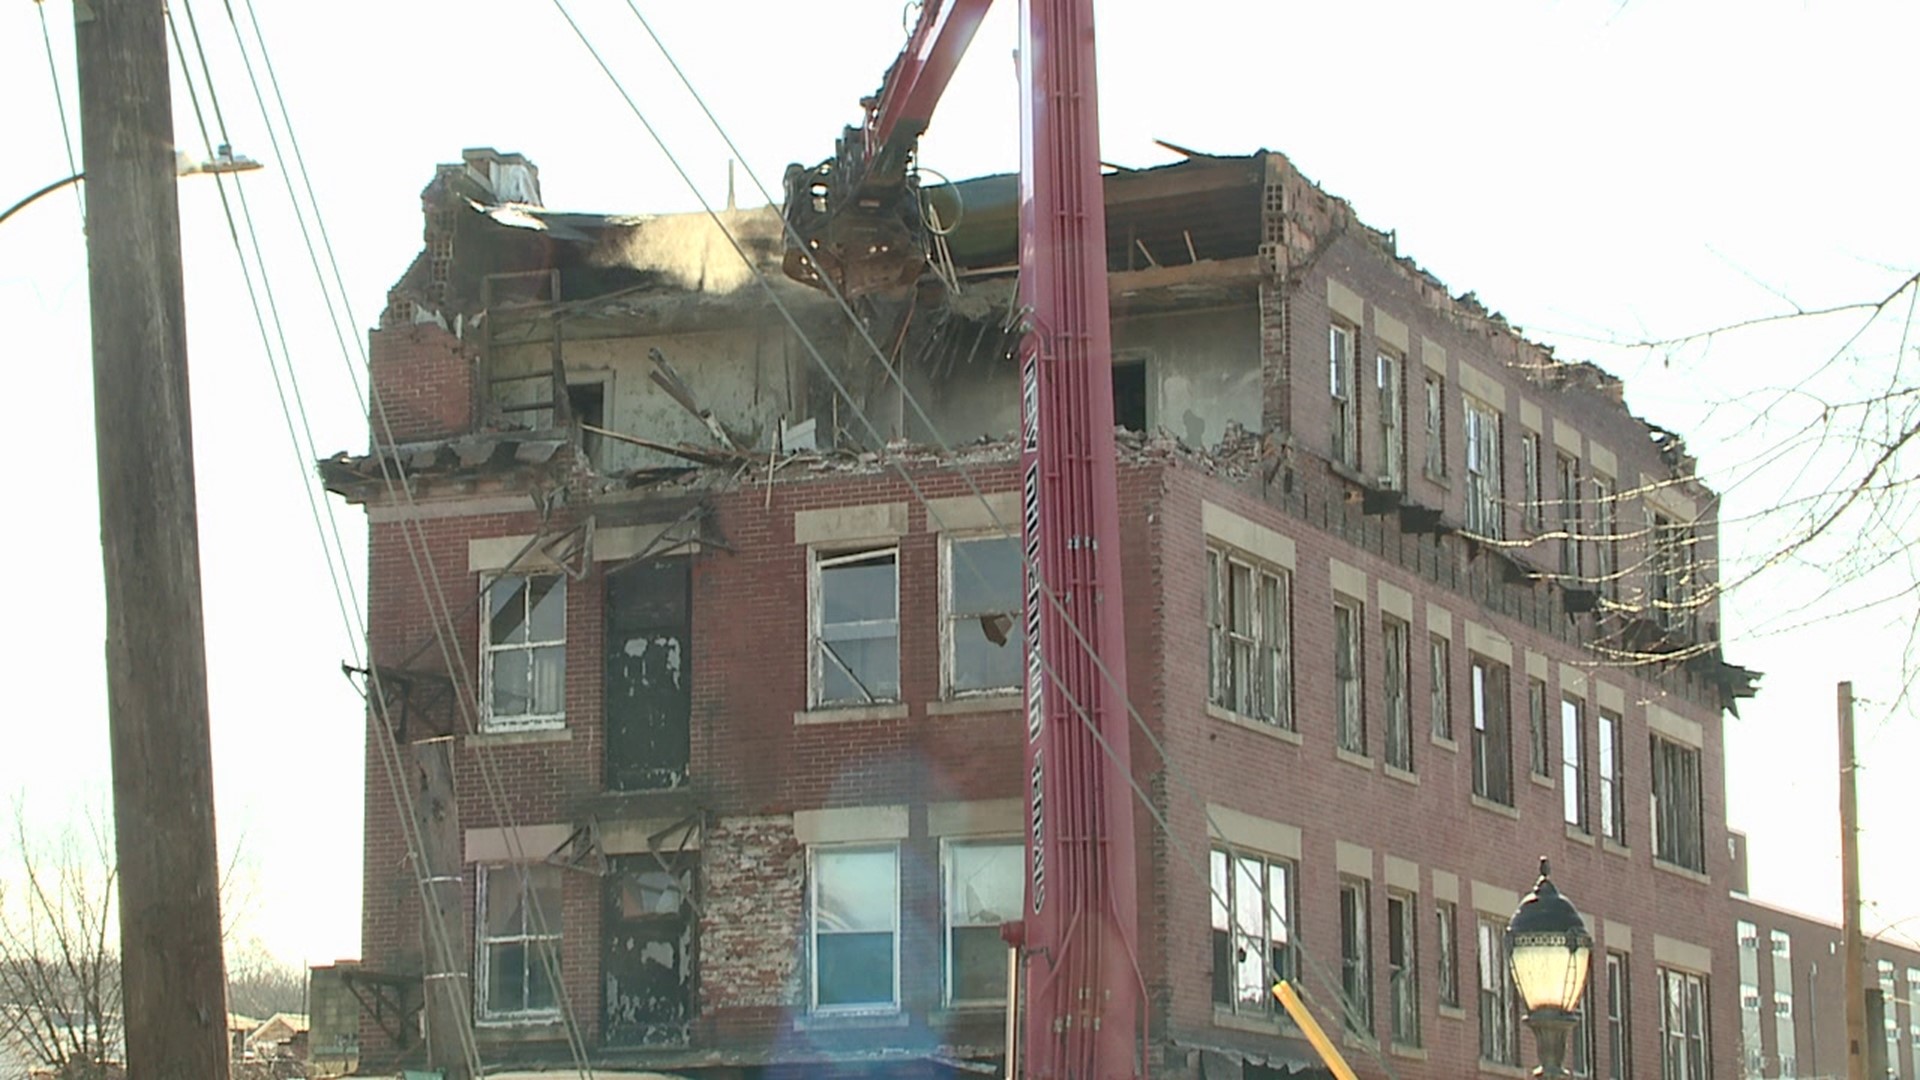 Demolition on the former hotel began Saturday morning in the city.